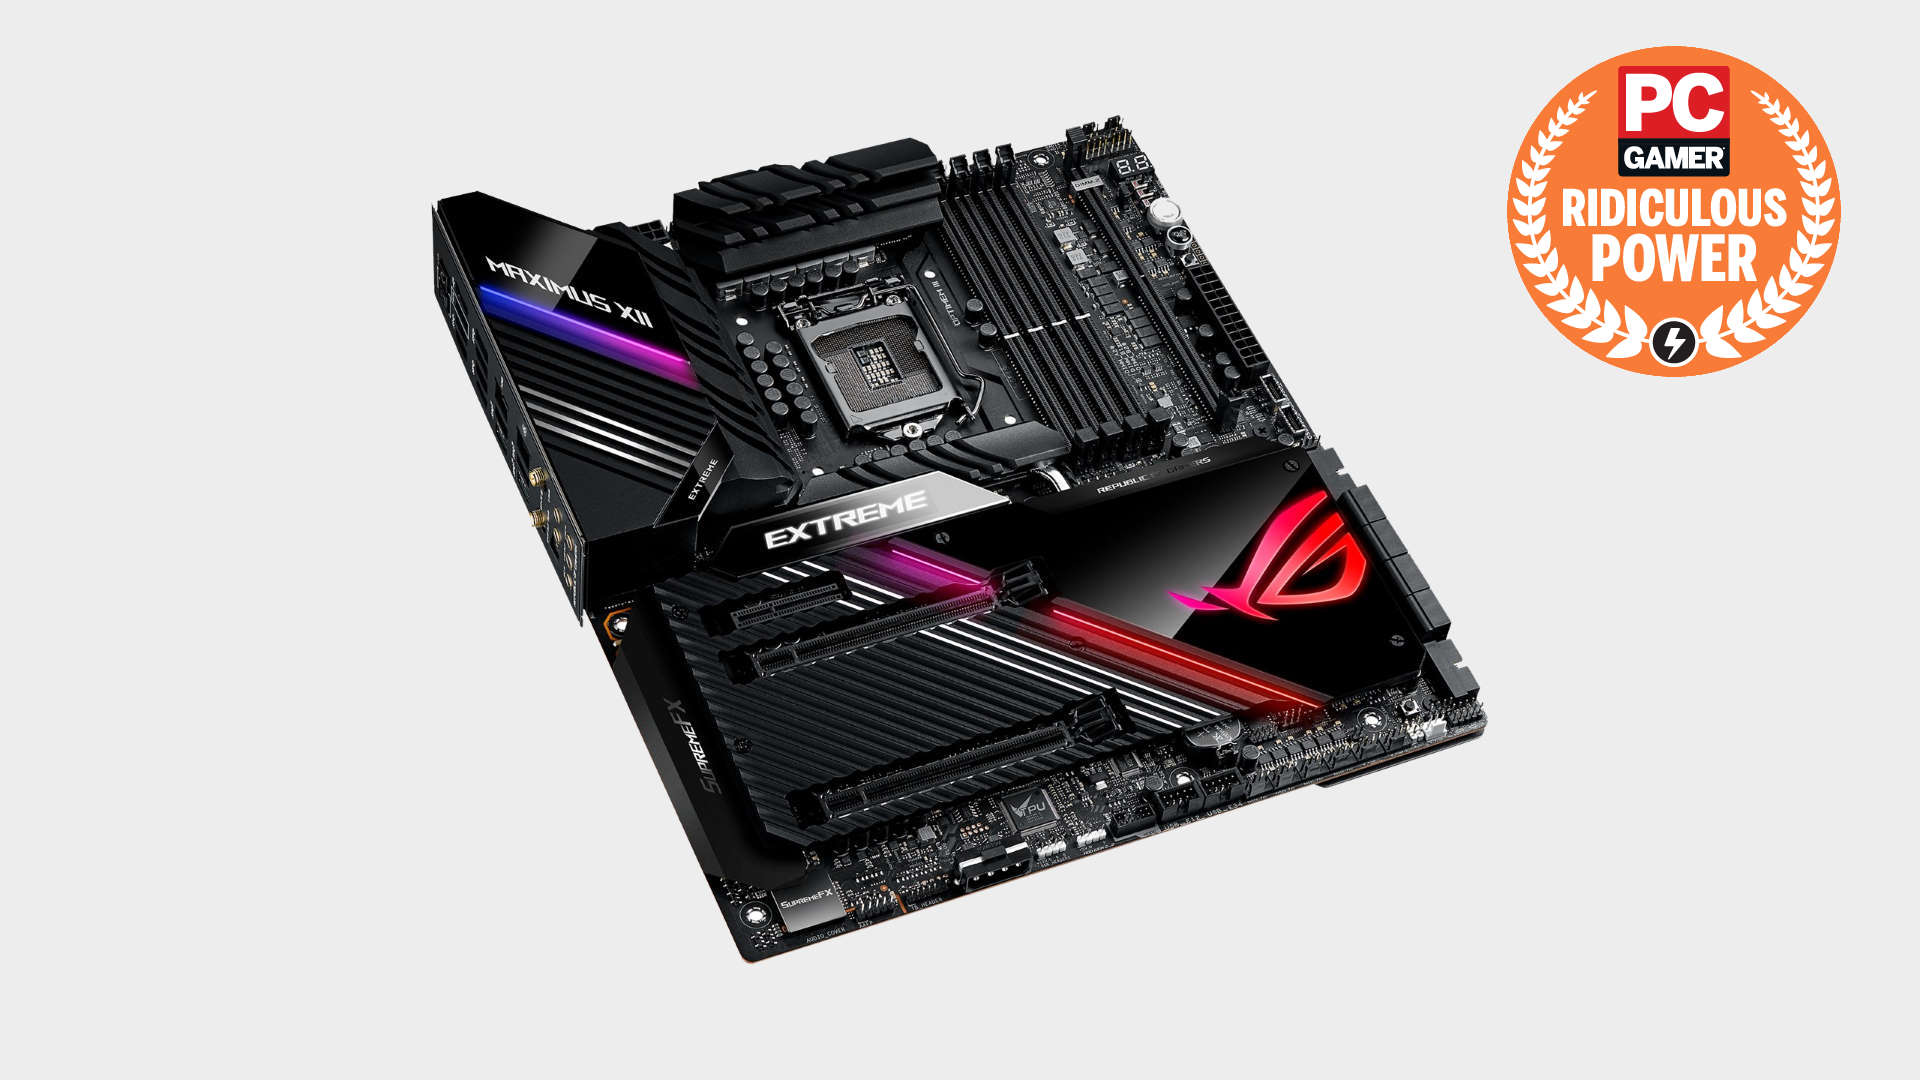 Asus ROG Maximus XII Extreme motherboard